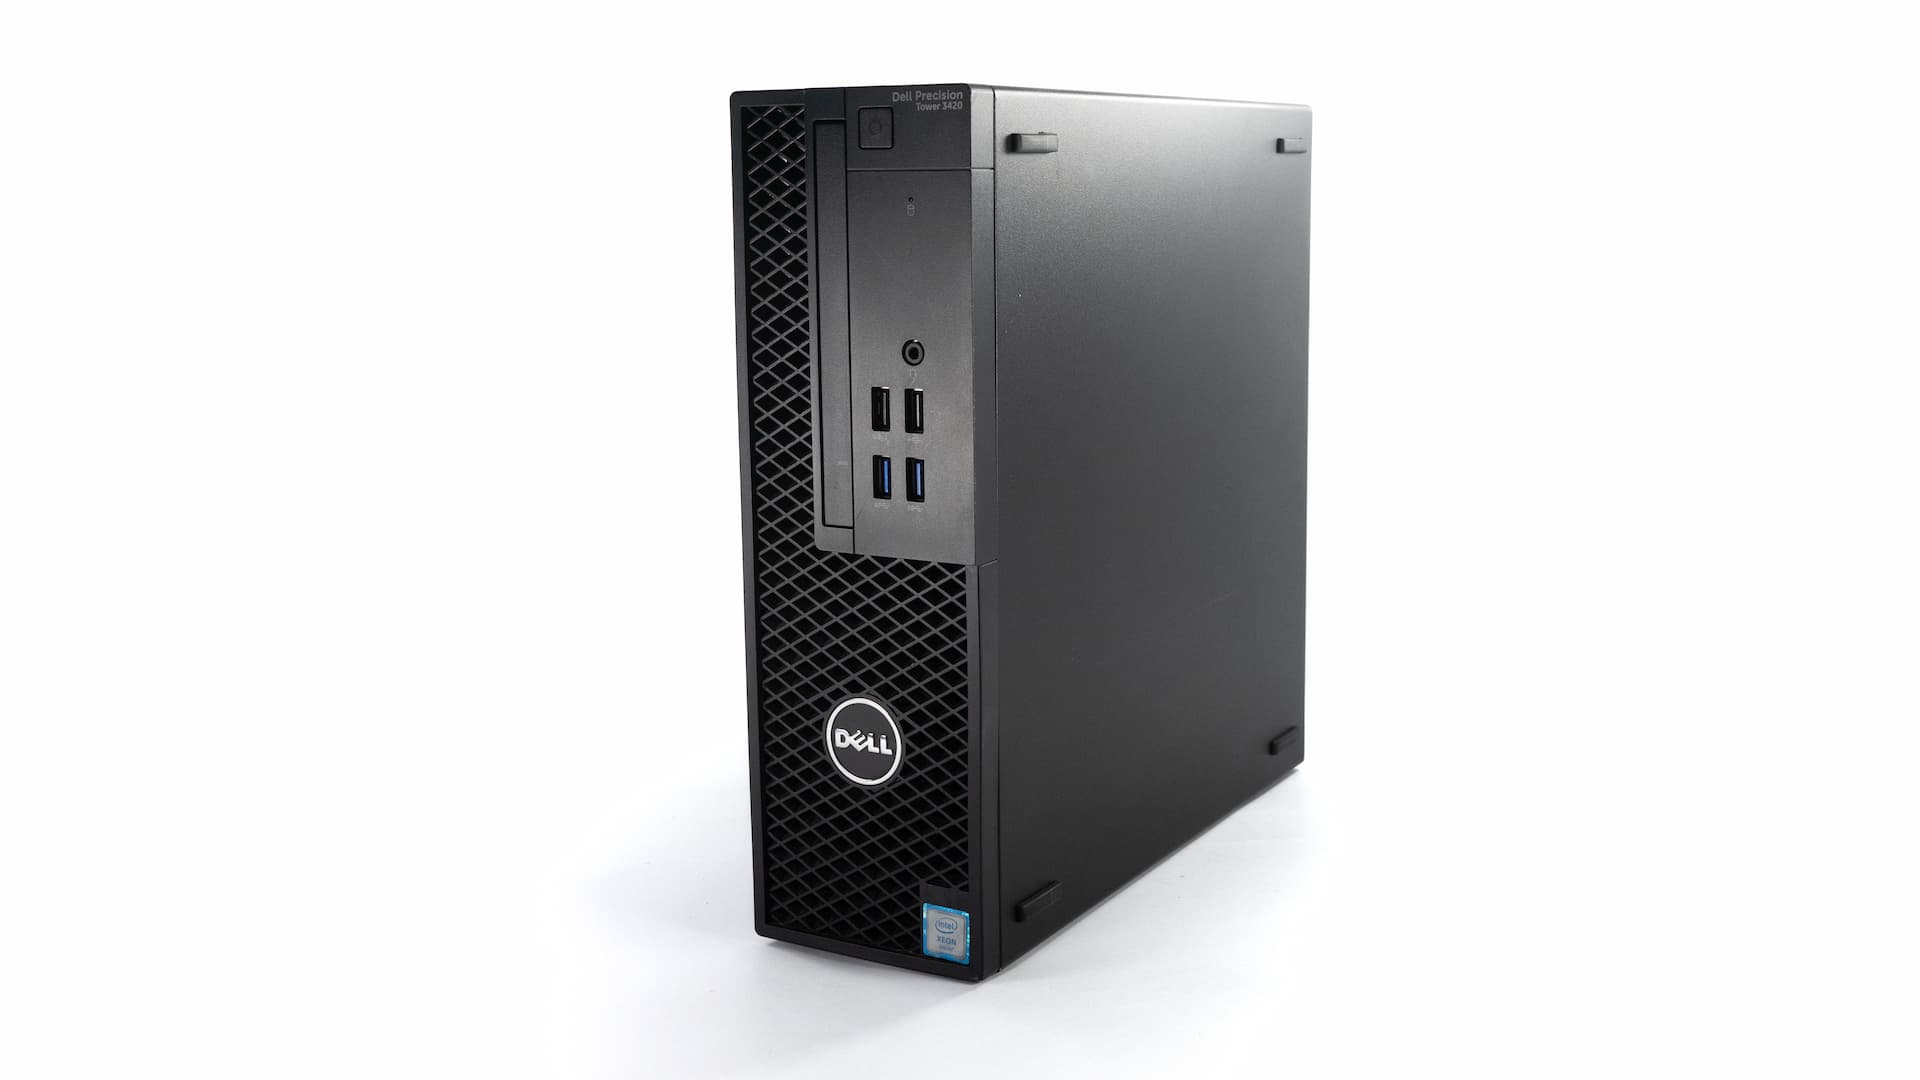 Dell-Precision-Tower-3420-3.jpg Brugte computere